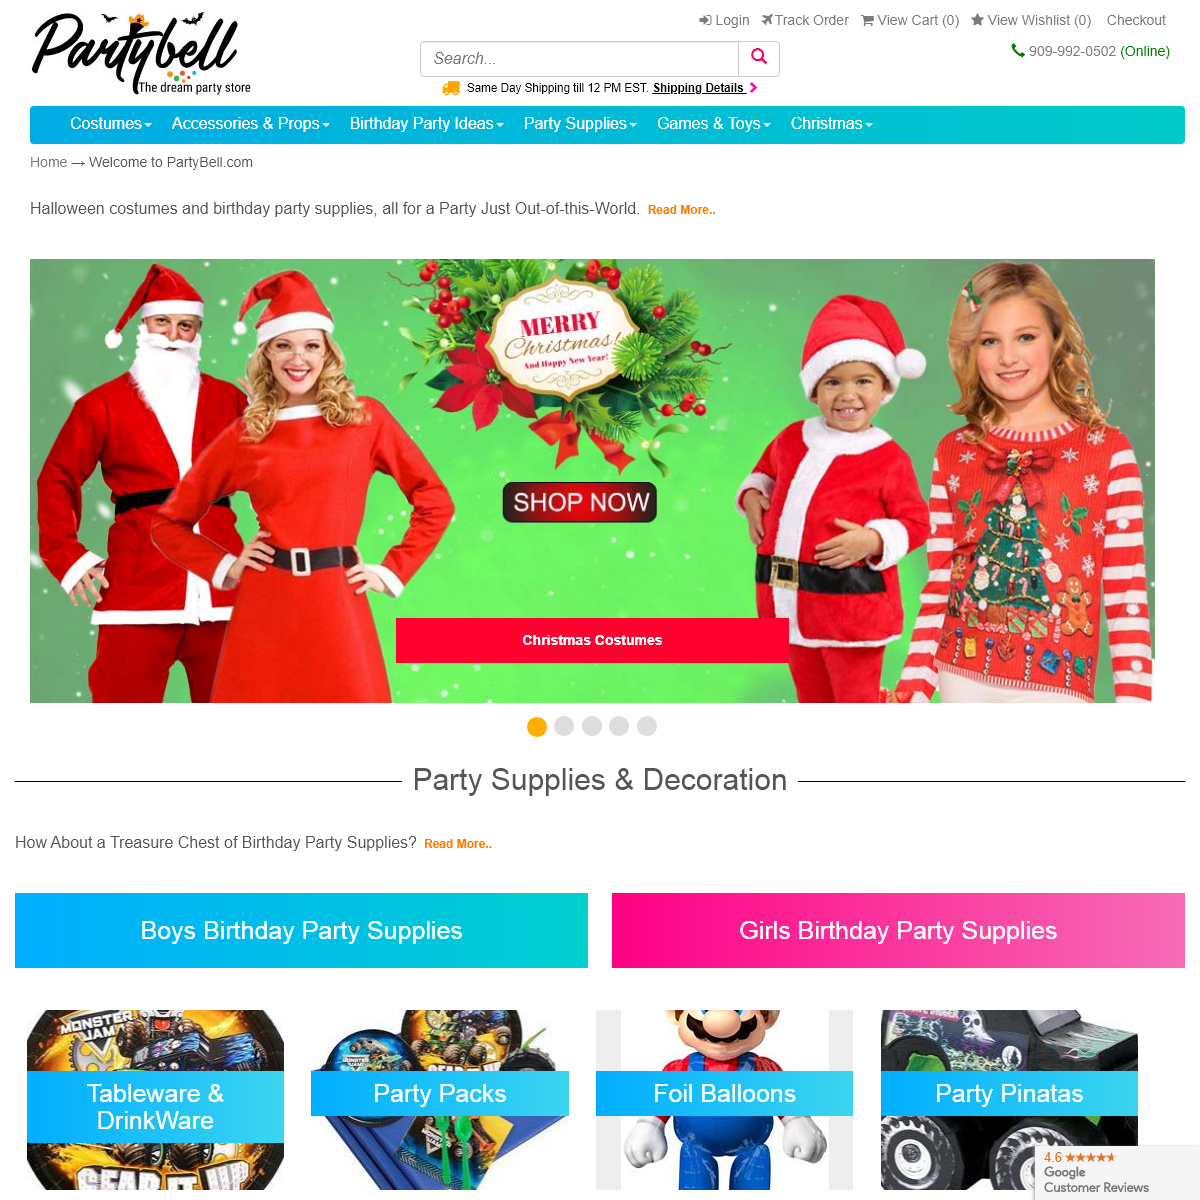 A complete backup of partybell.com